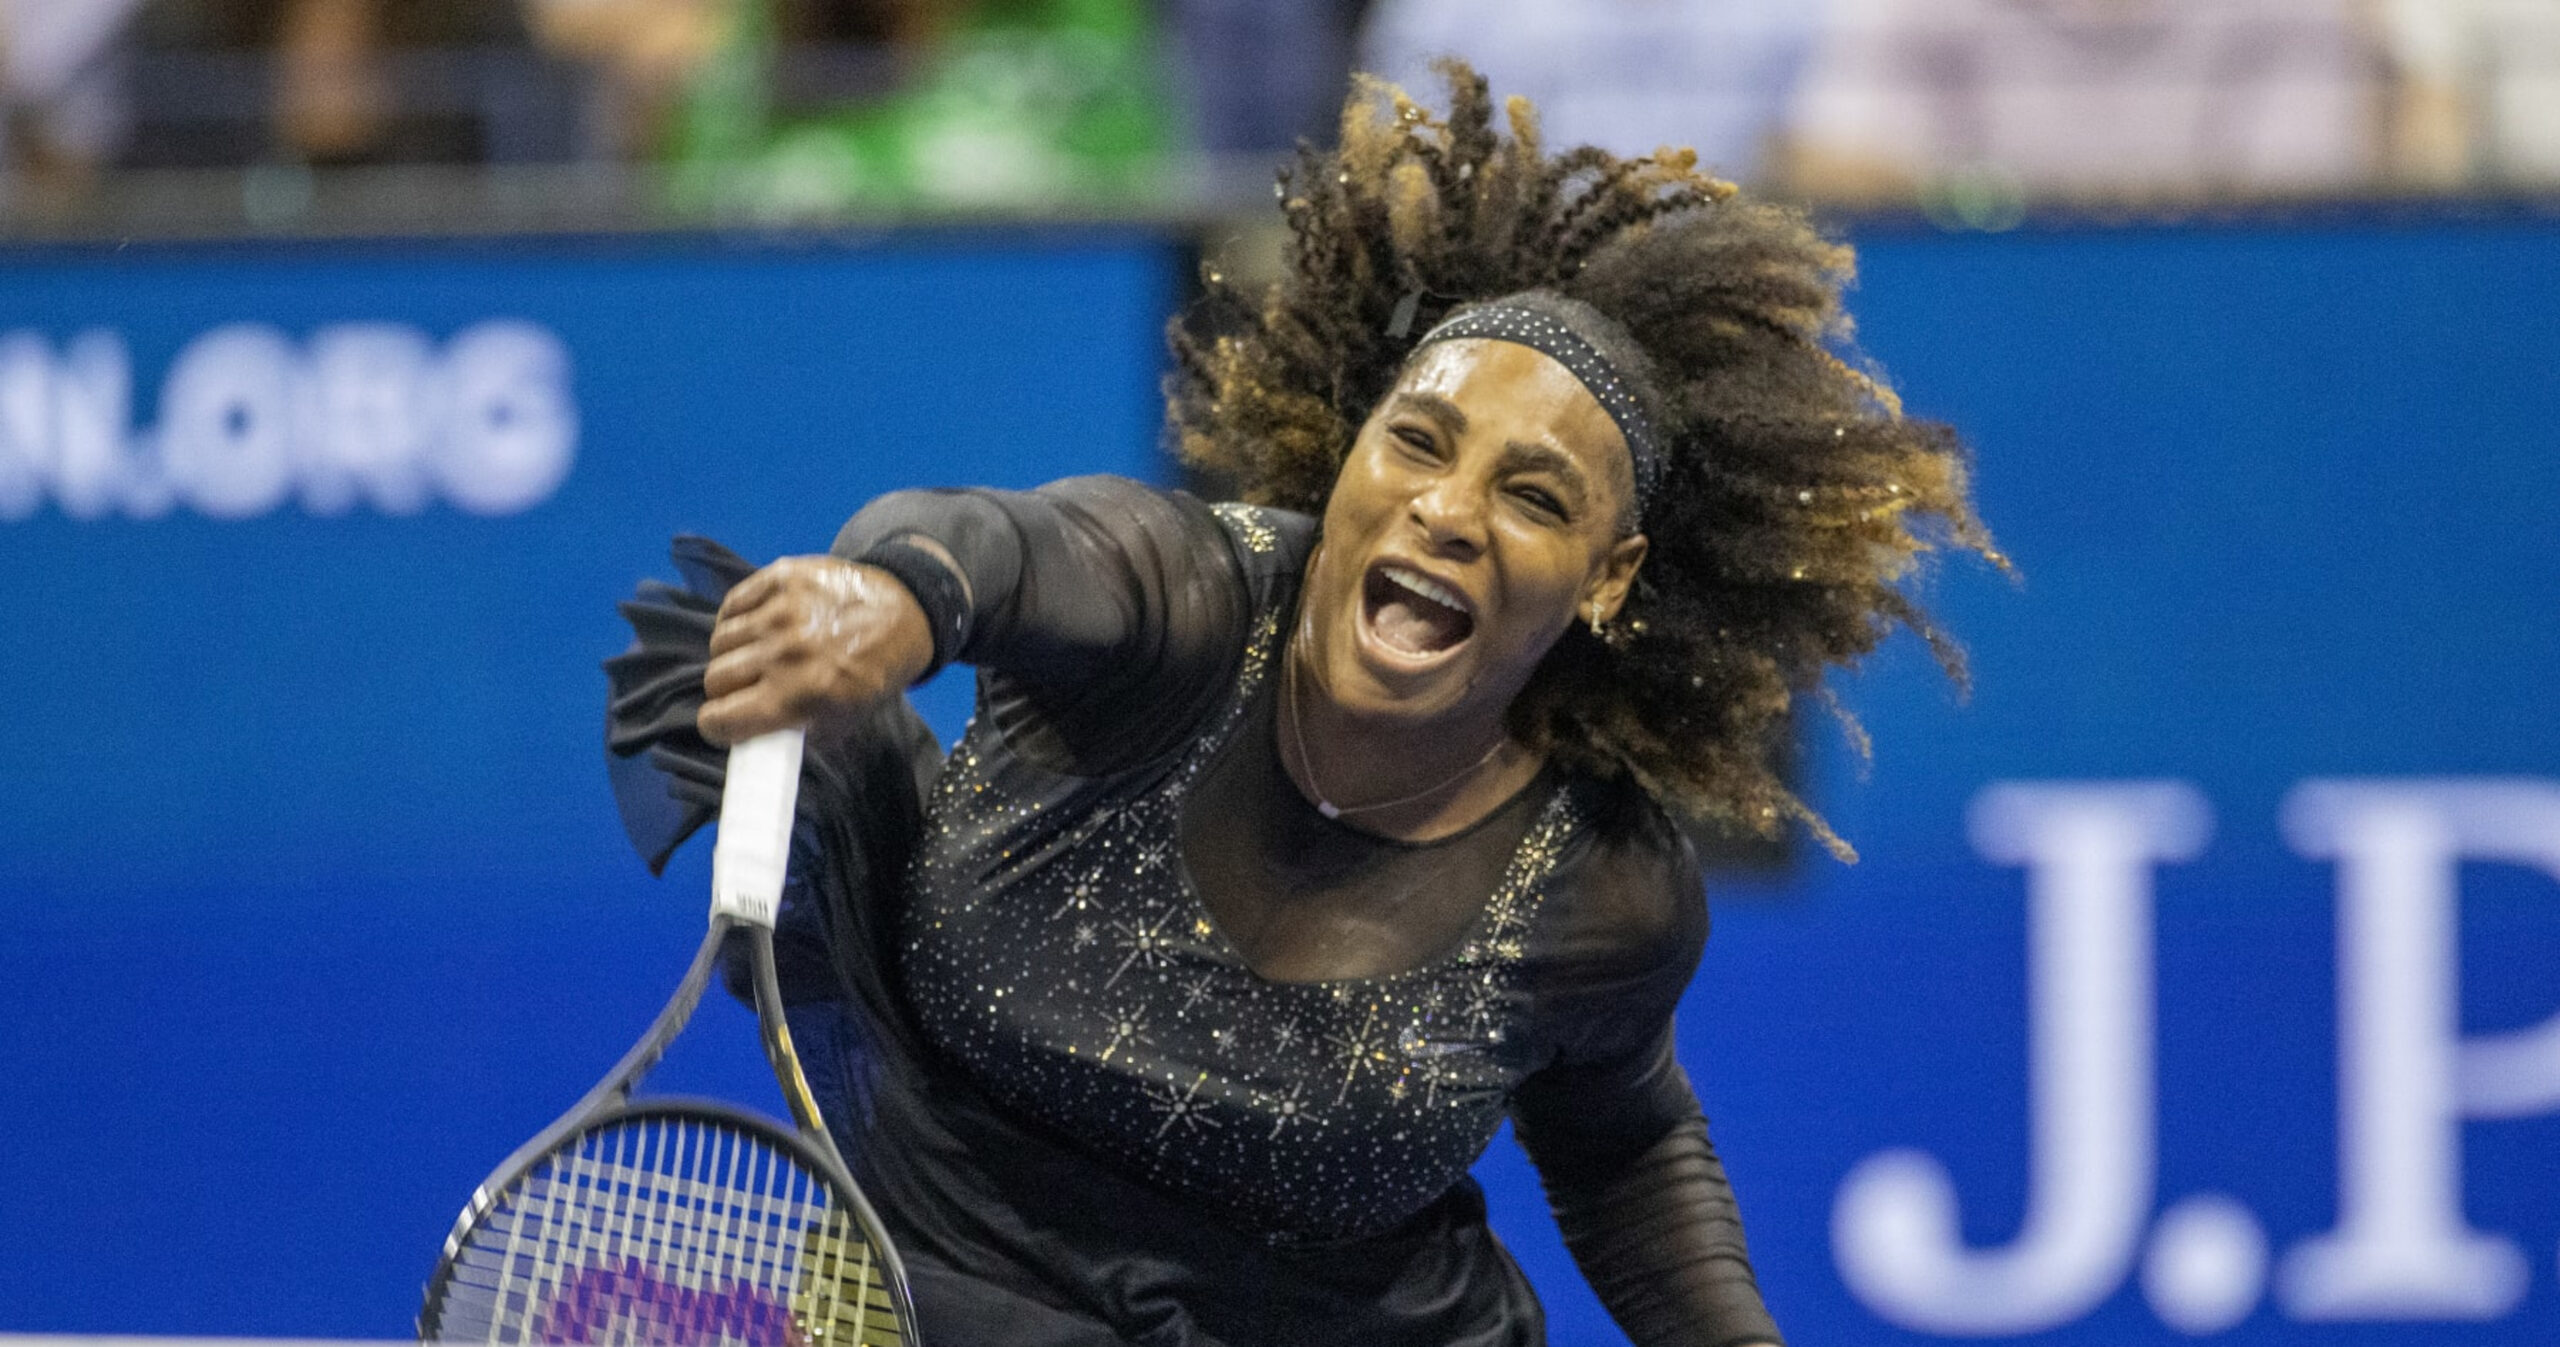 Serena Williams’ GOAT Status Celebrated by Sports World After Final US Open Match